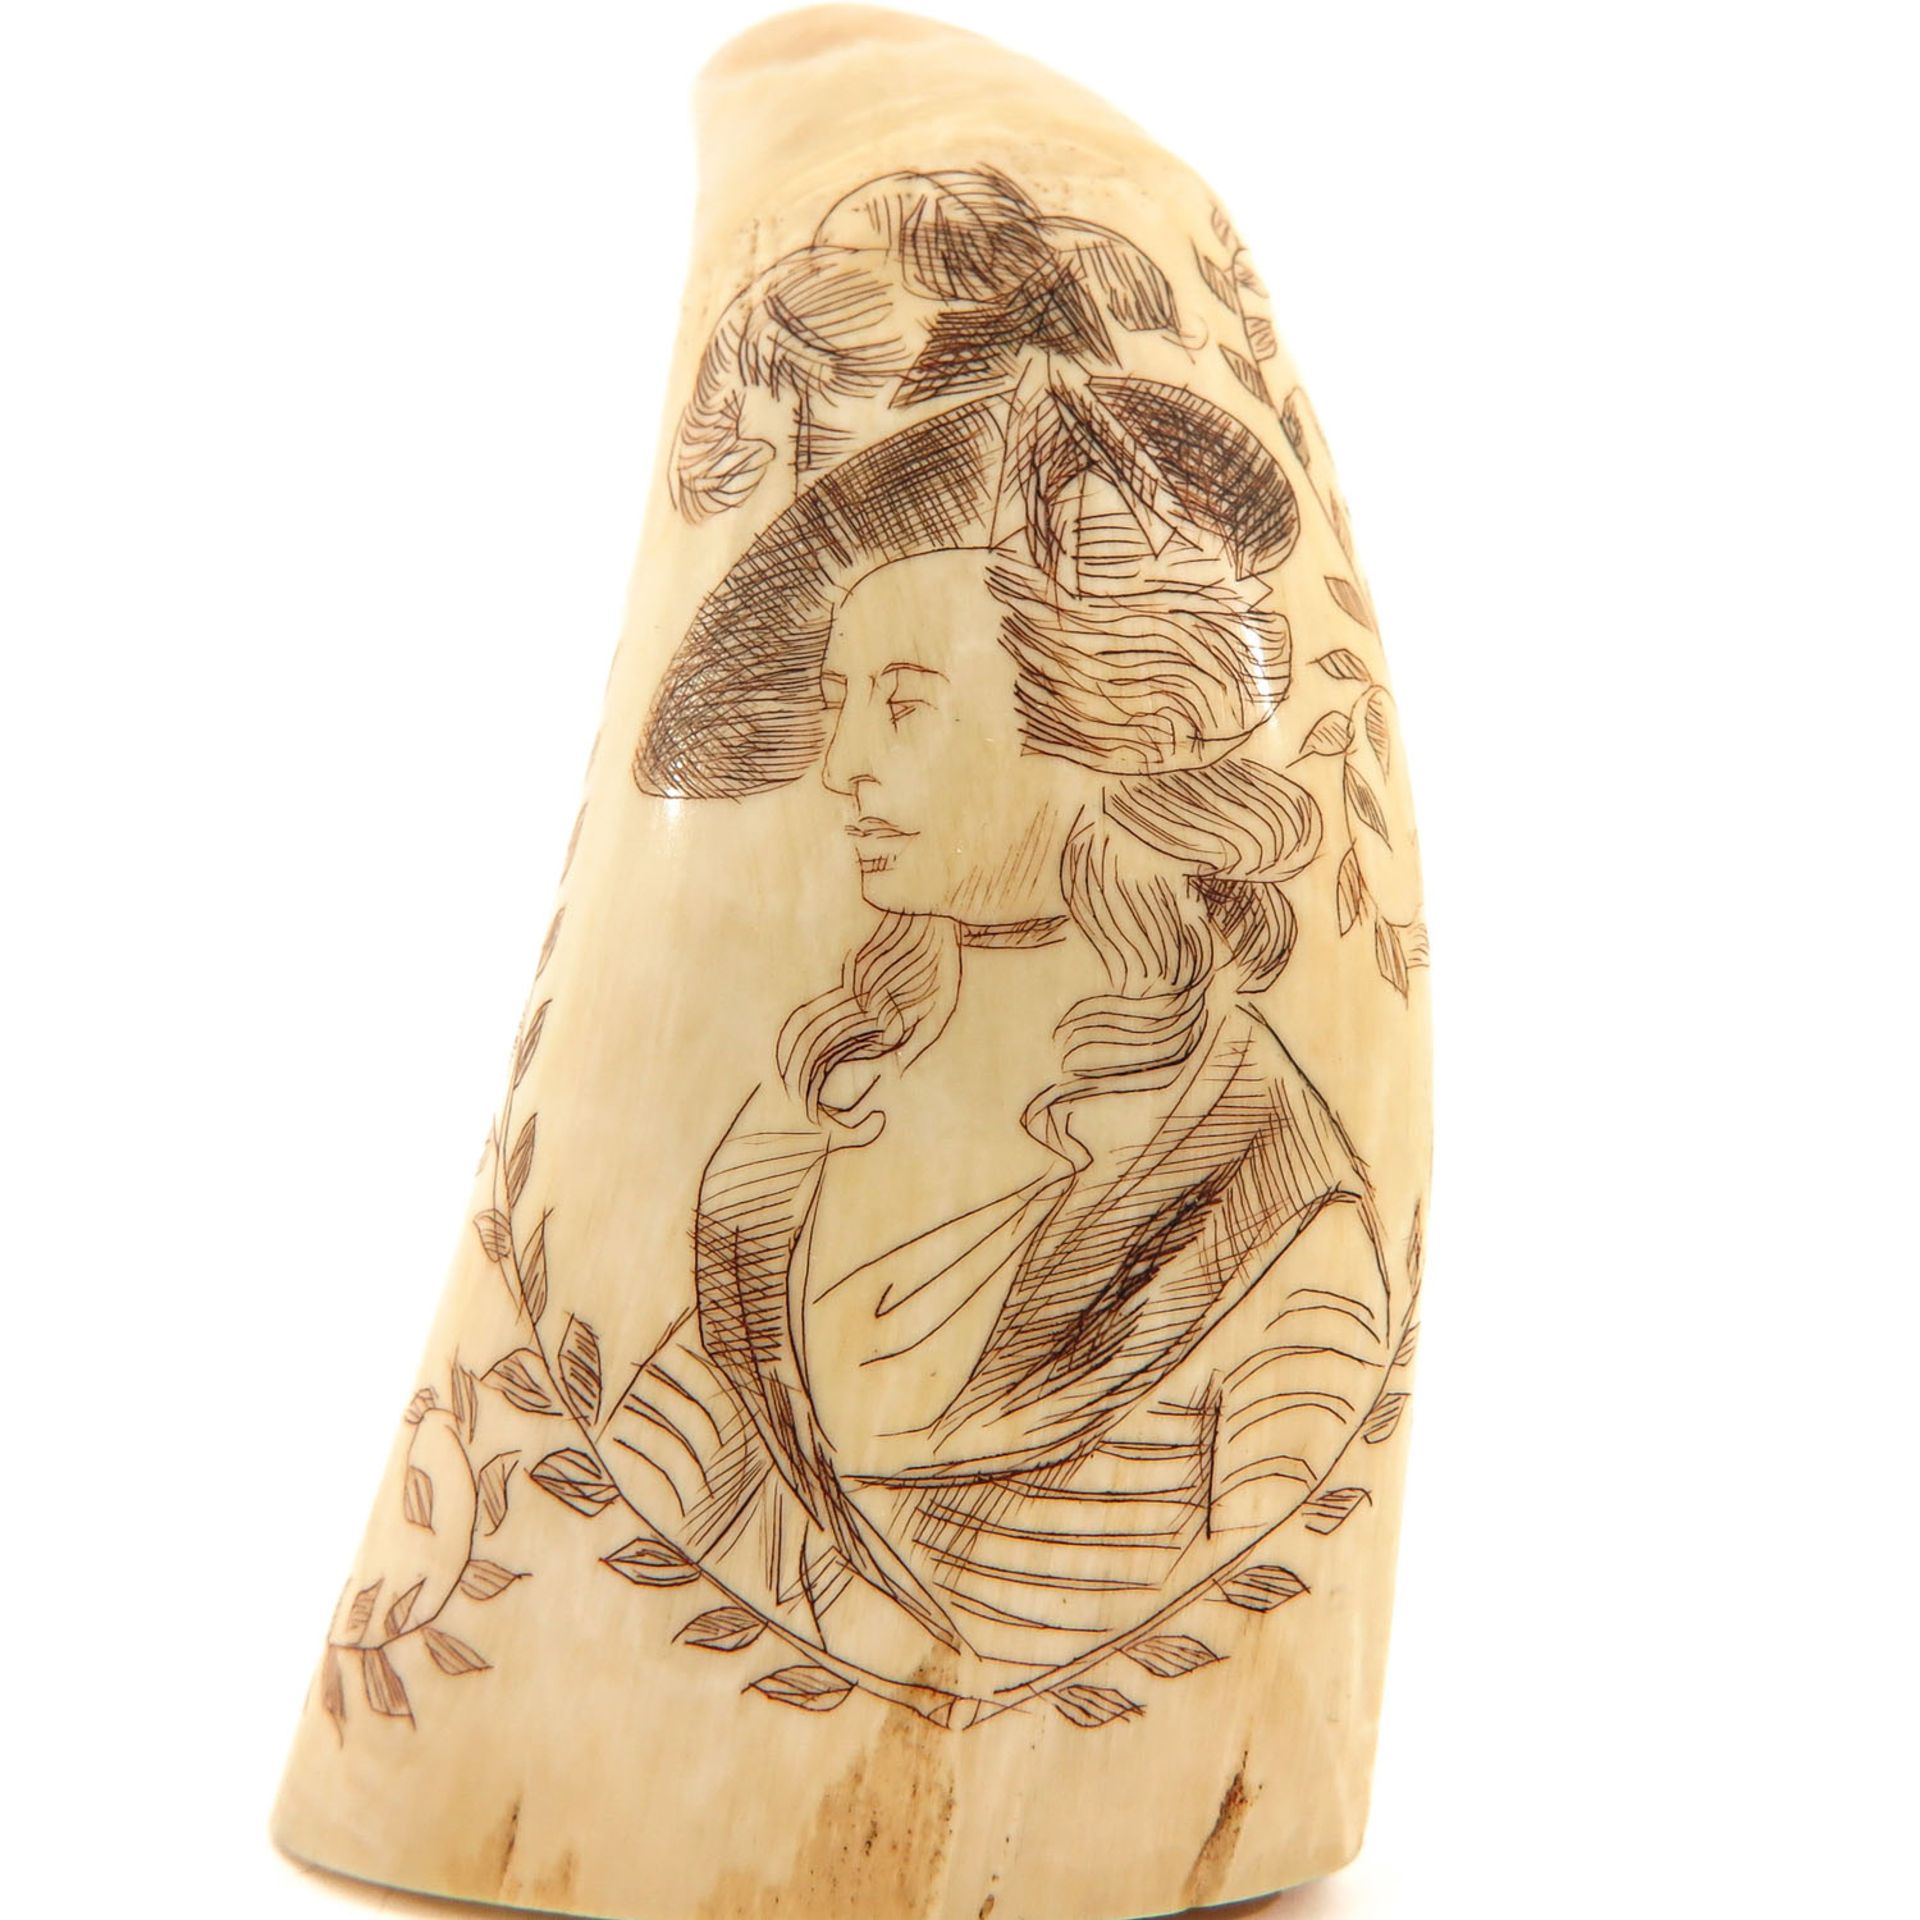 A 19th Century Scrimshaw Depicting Lady - Image 8 of 8